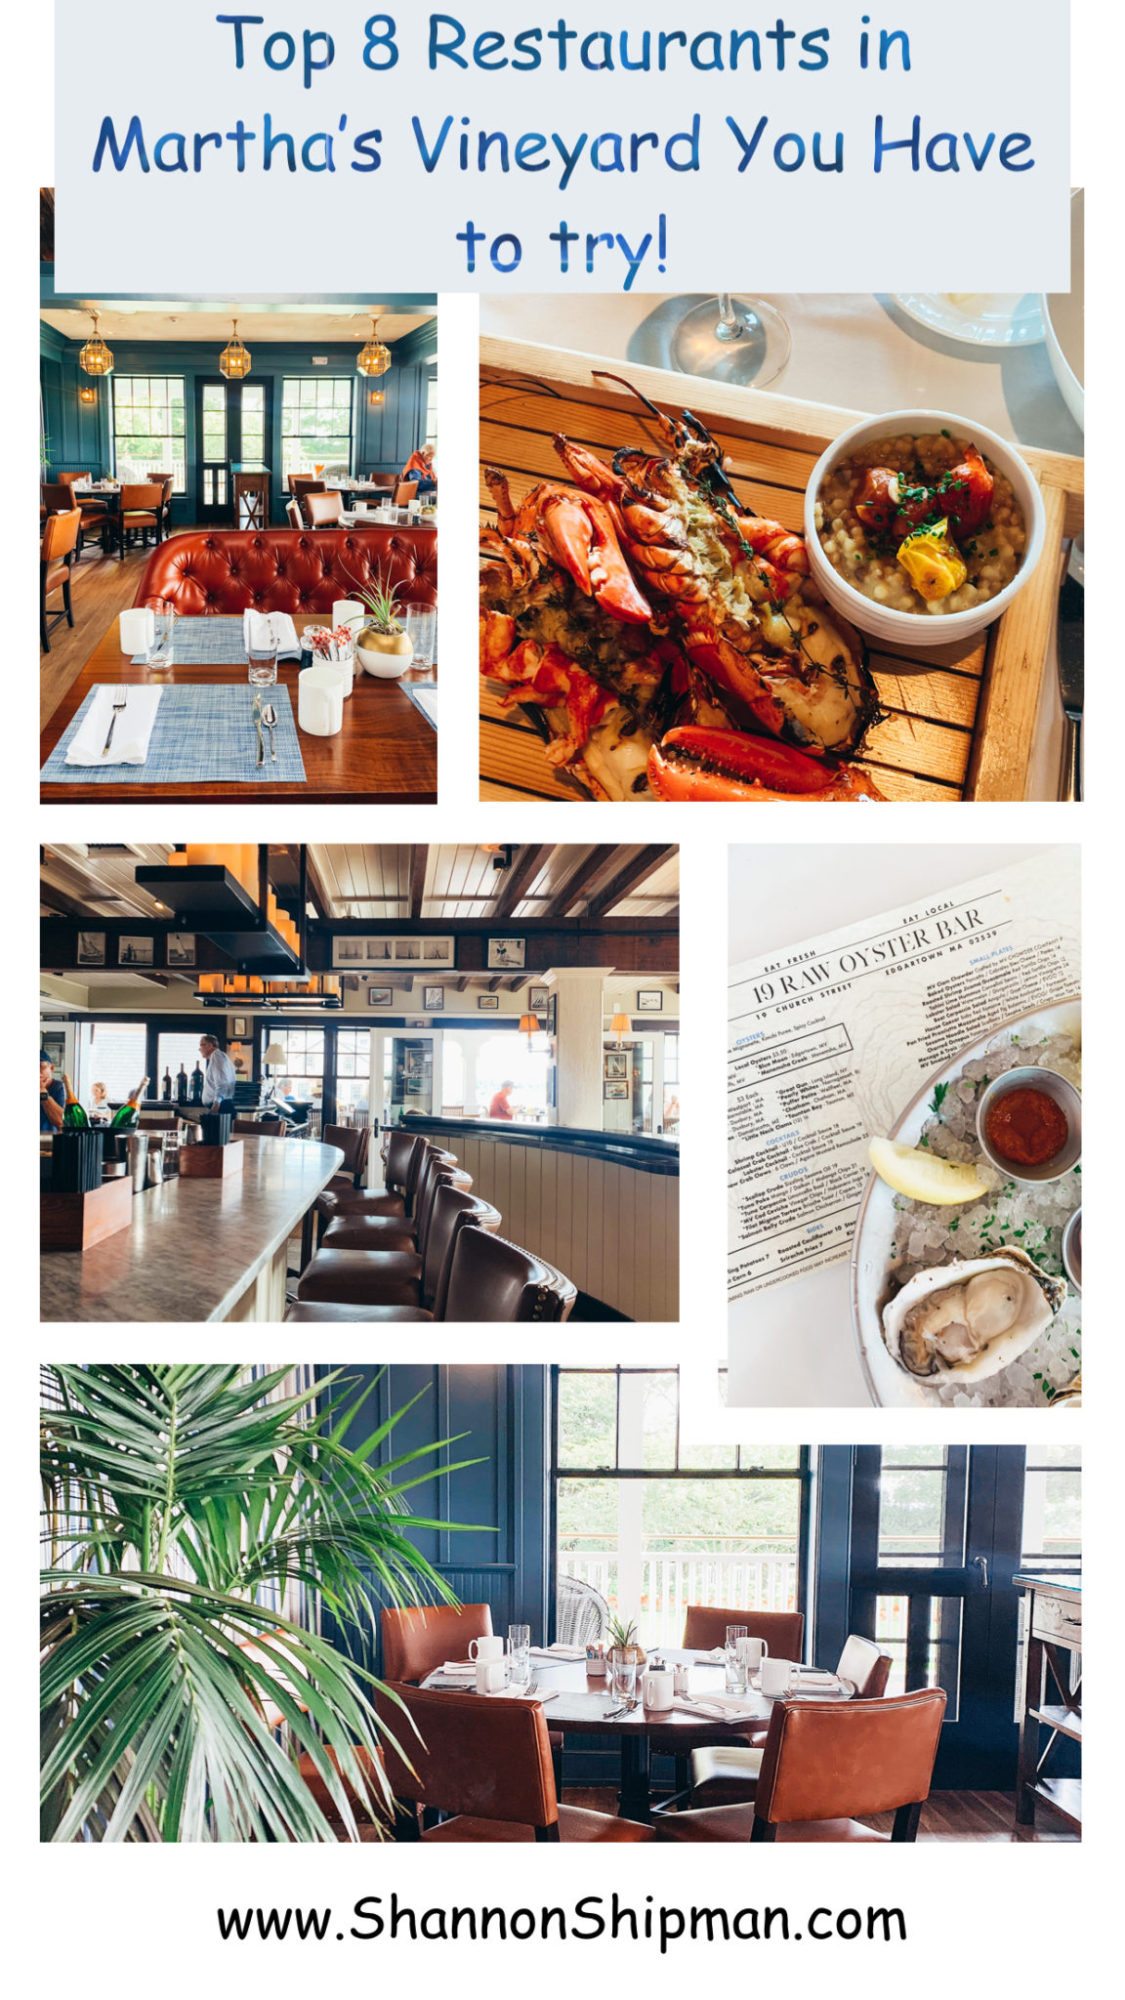 New England Foodie Guide: Top 8 Restaurants in Martha's Vineyard You Must Try by popular New England Food Blogger, Shannon Shipman: collage image of a restaurant in Martha's Vineyard.